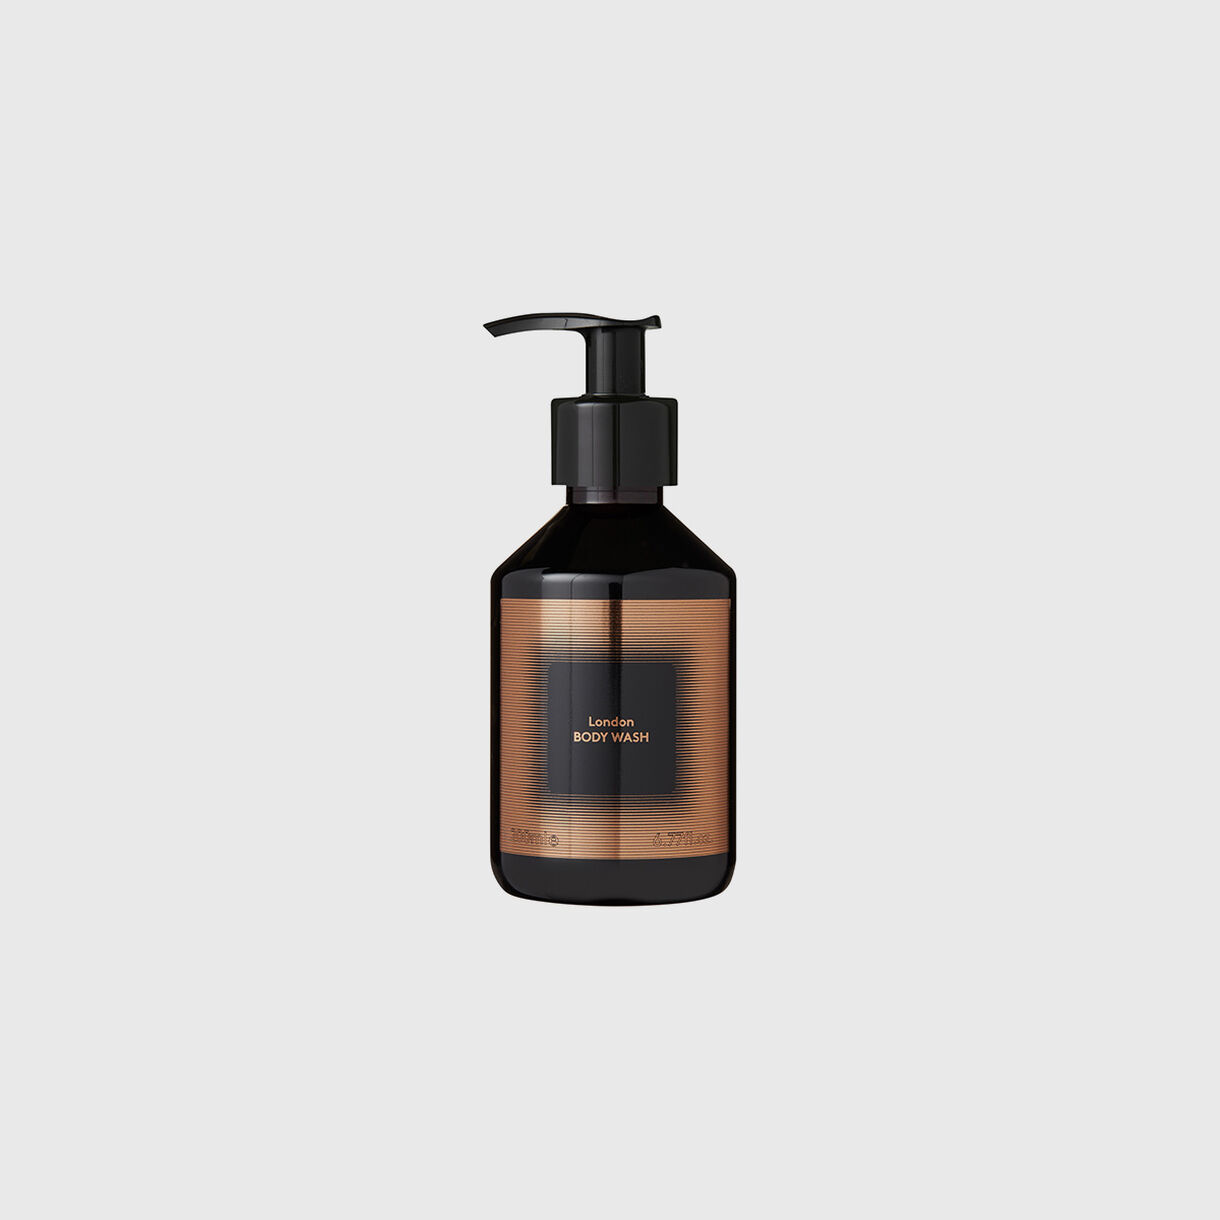 Eclectic London Body Wash, 200ml